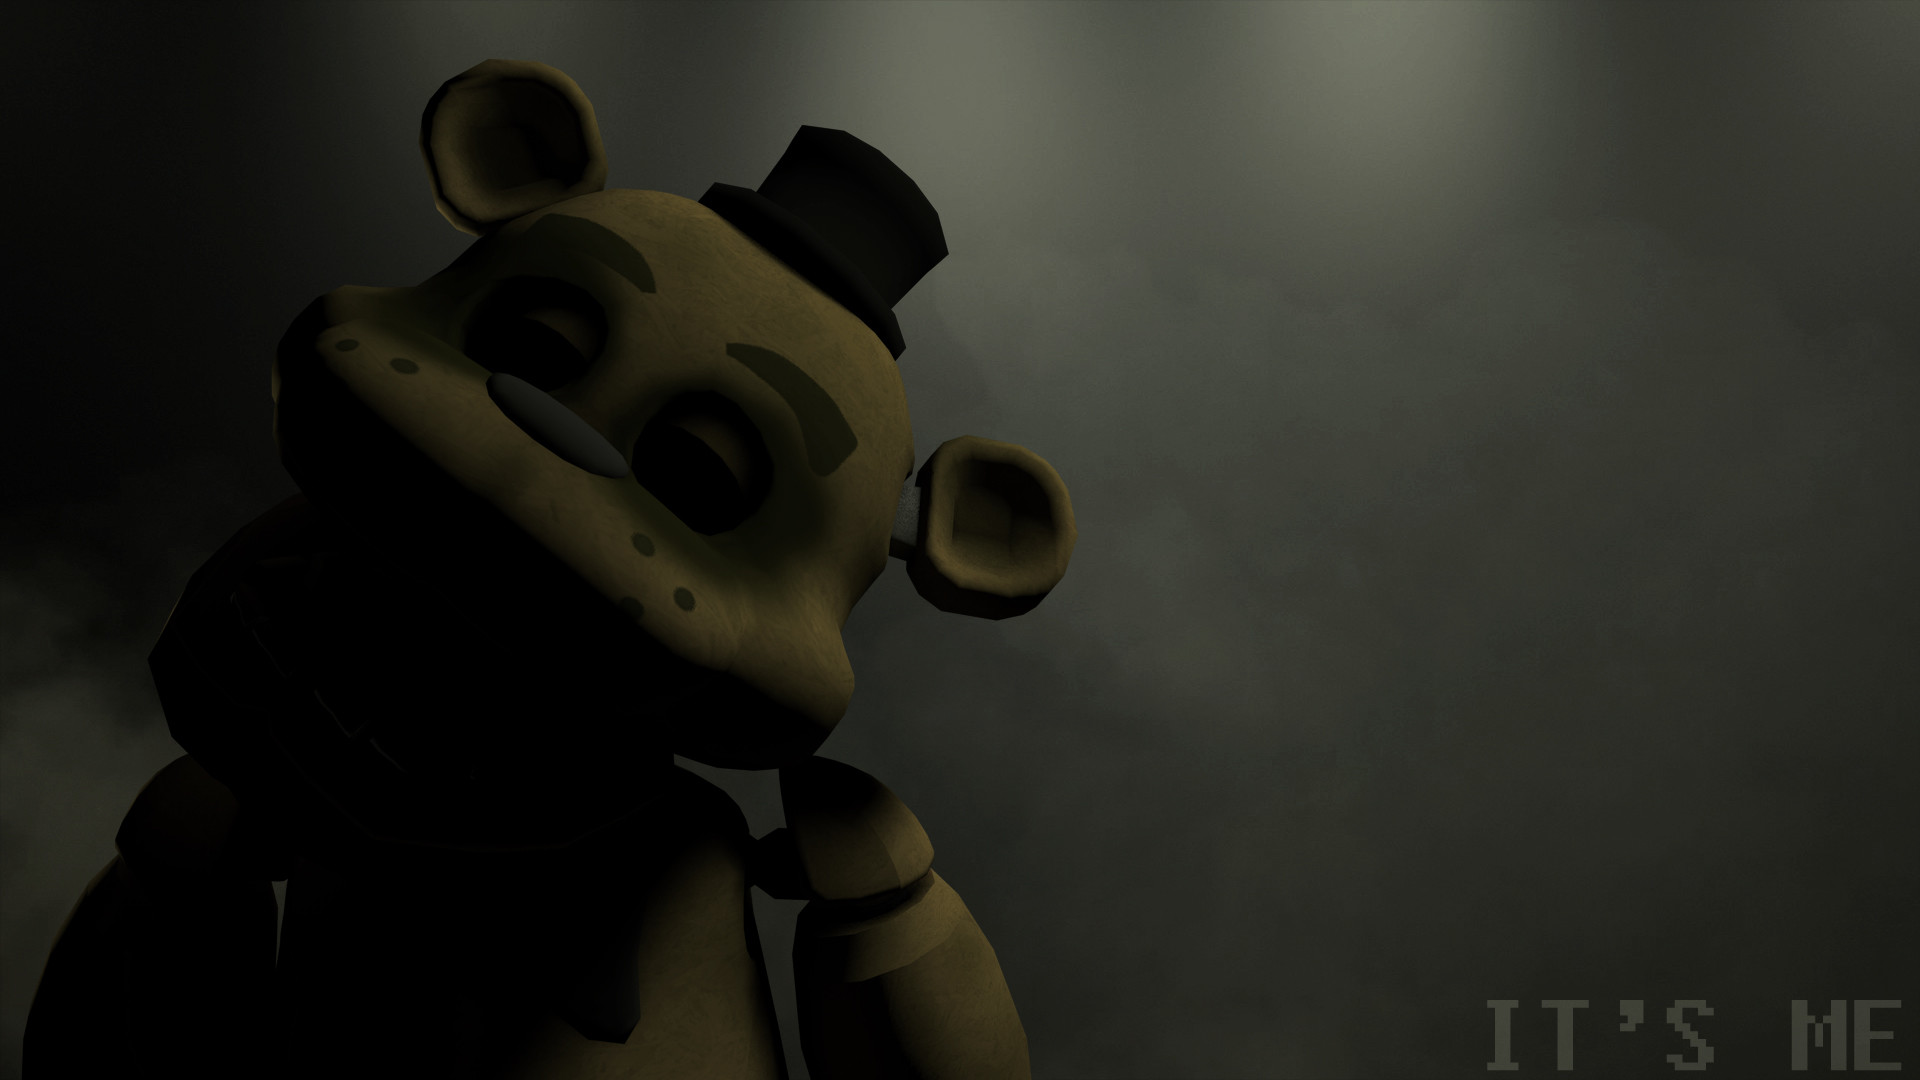 Five Nights at Freddy's Bonnie Wallpaper DOWNLOAD by NiksonYT on .